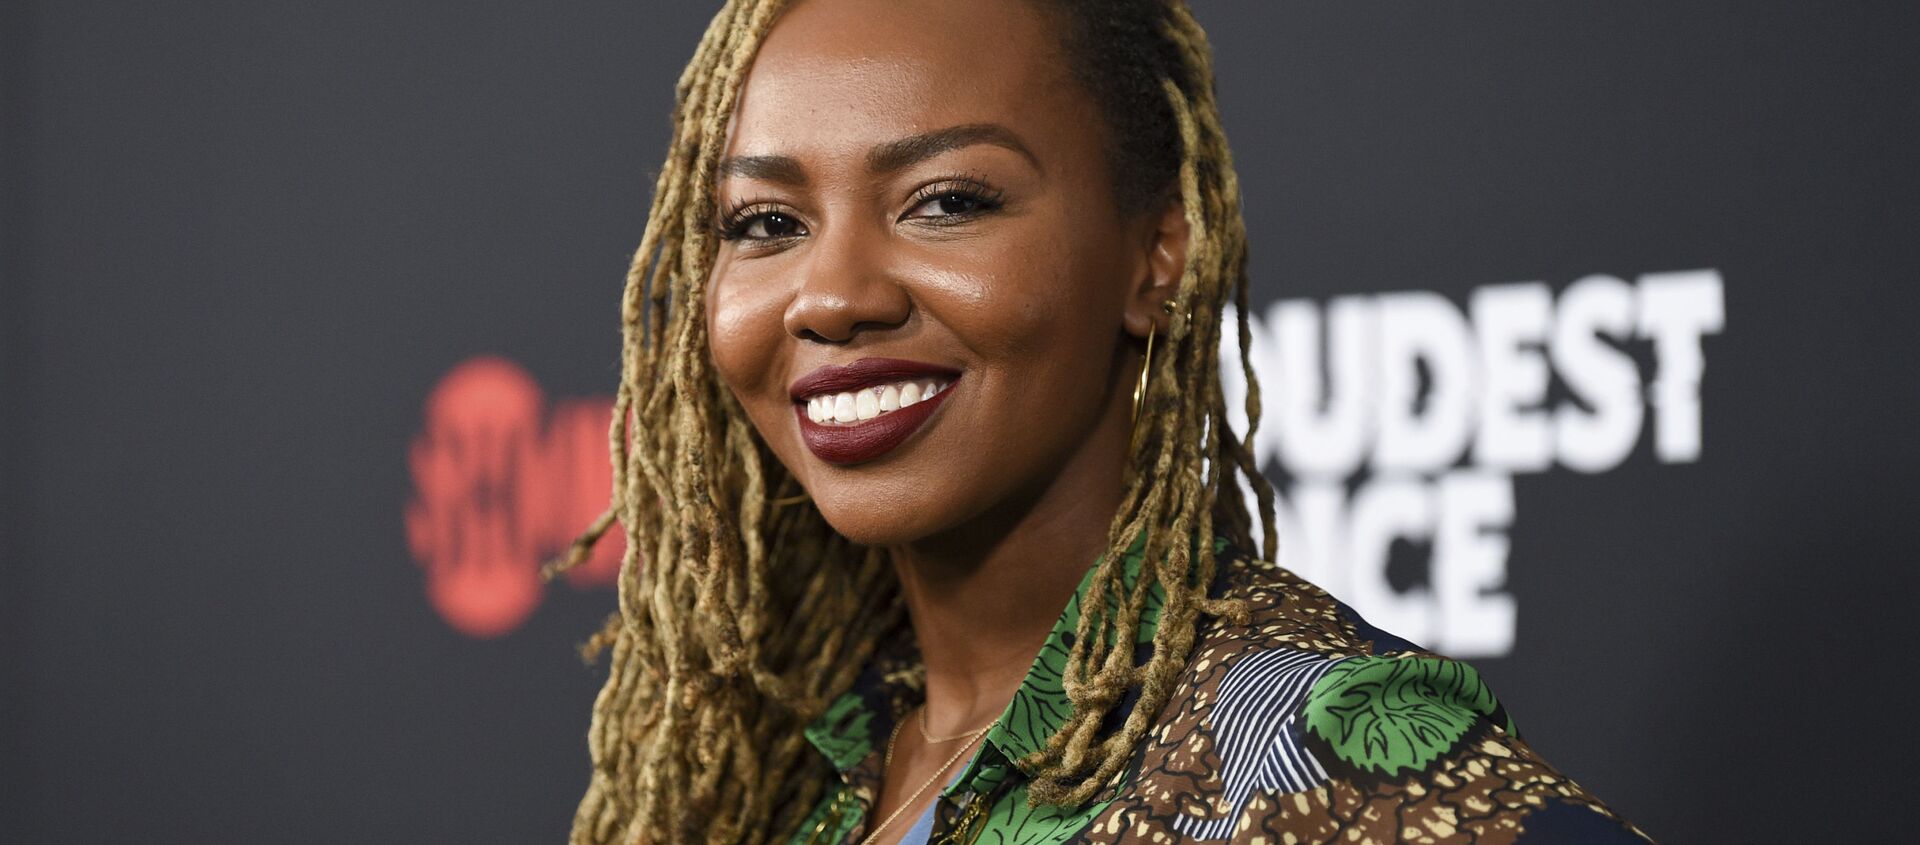 Black Lives Matter co-founder Opal Tometi attends the premiere of the ShowTime limited series The Loudest Voice at the Paris Theatre in New York. - Sputnik International, 1920, 09.03.2021